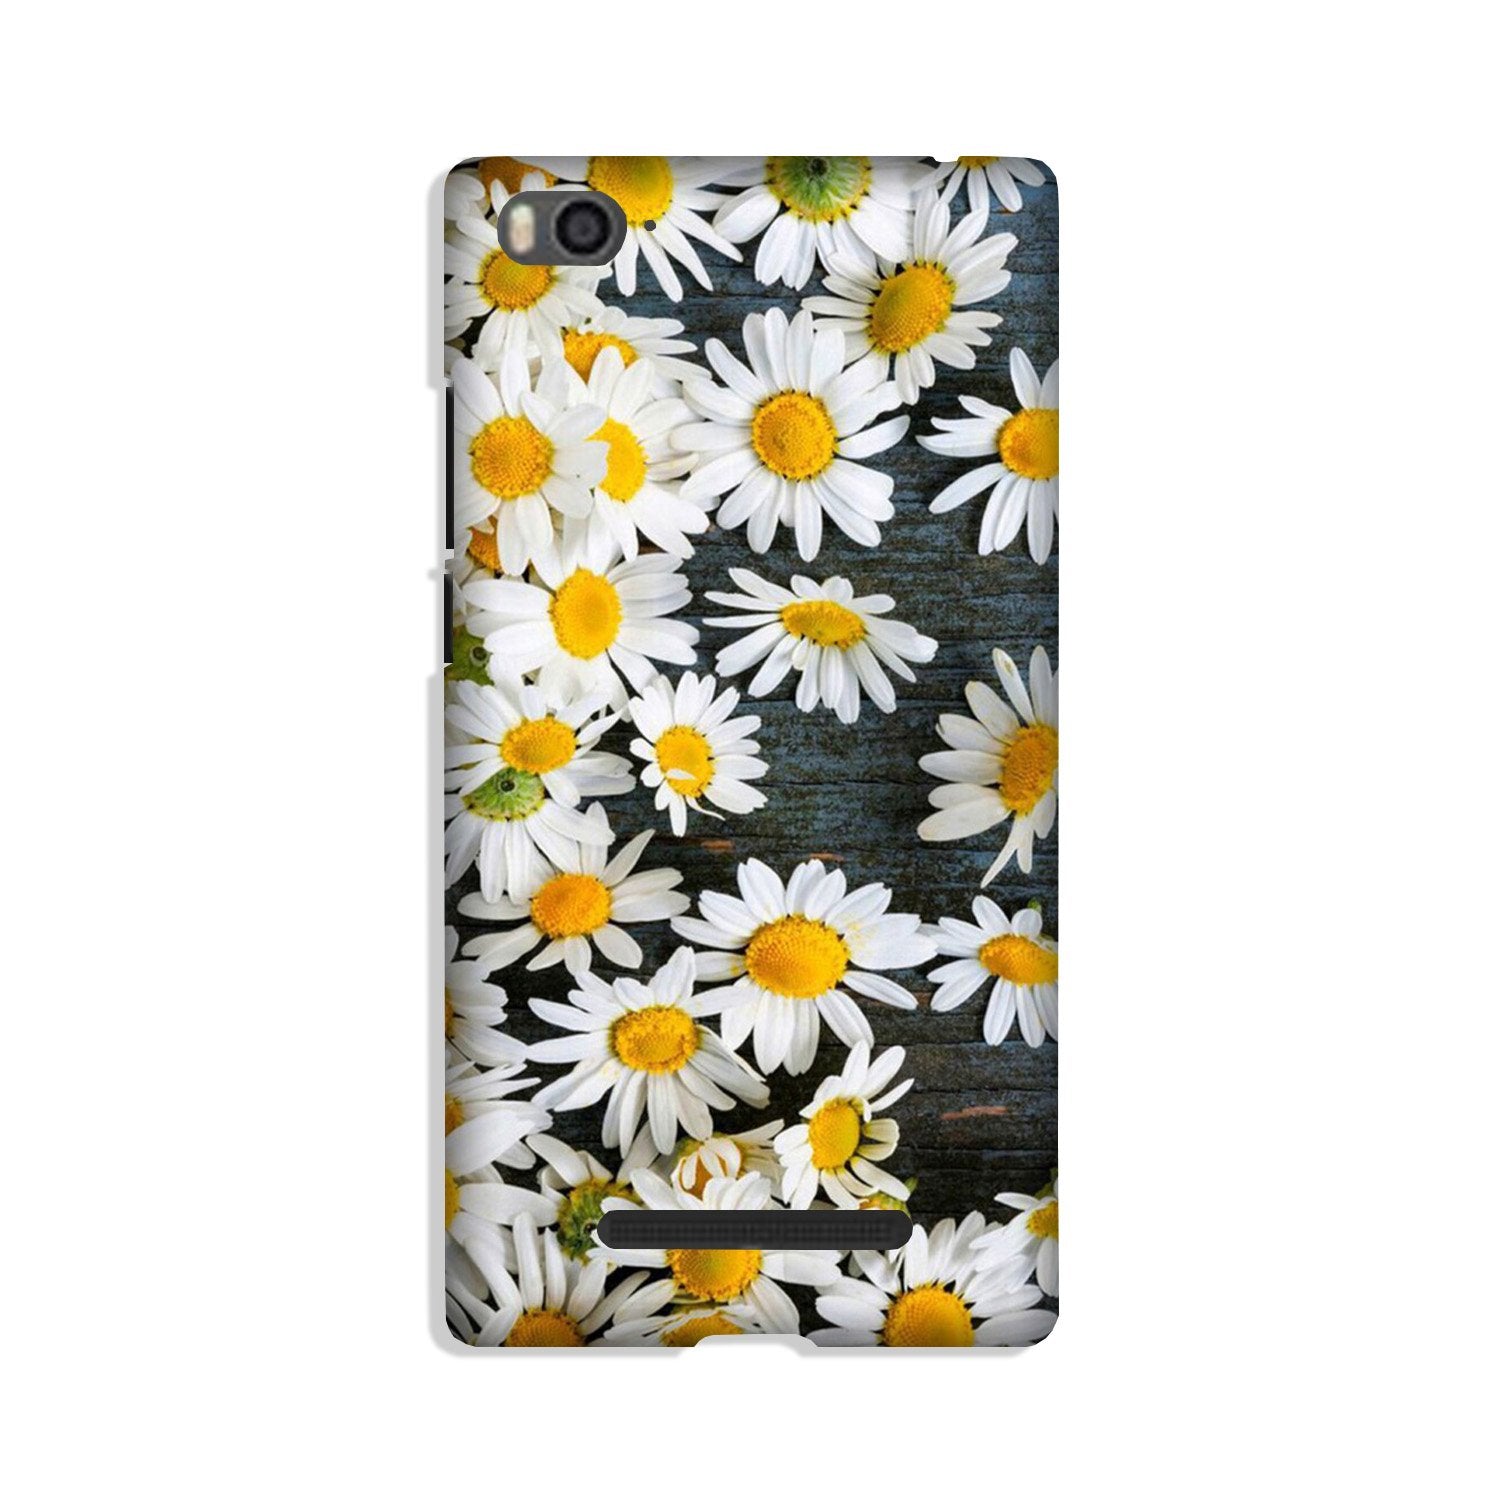 White flowers2 Case for Redmi 4A